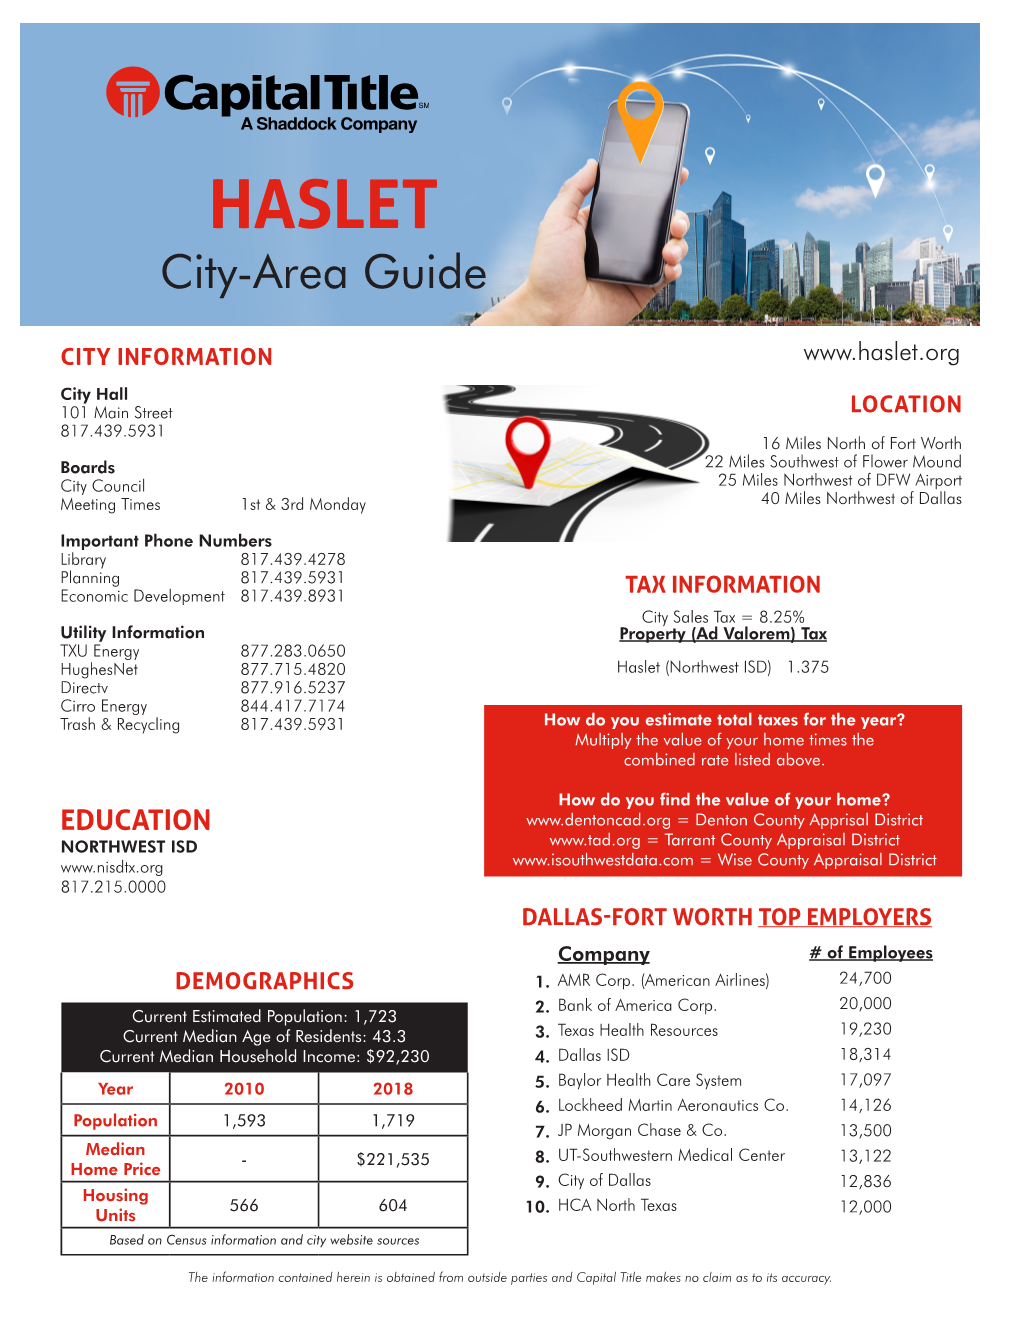 HASLET City-Area Guide